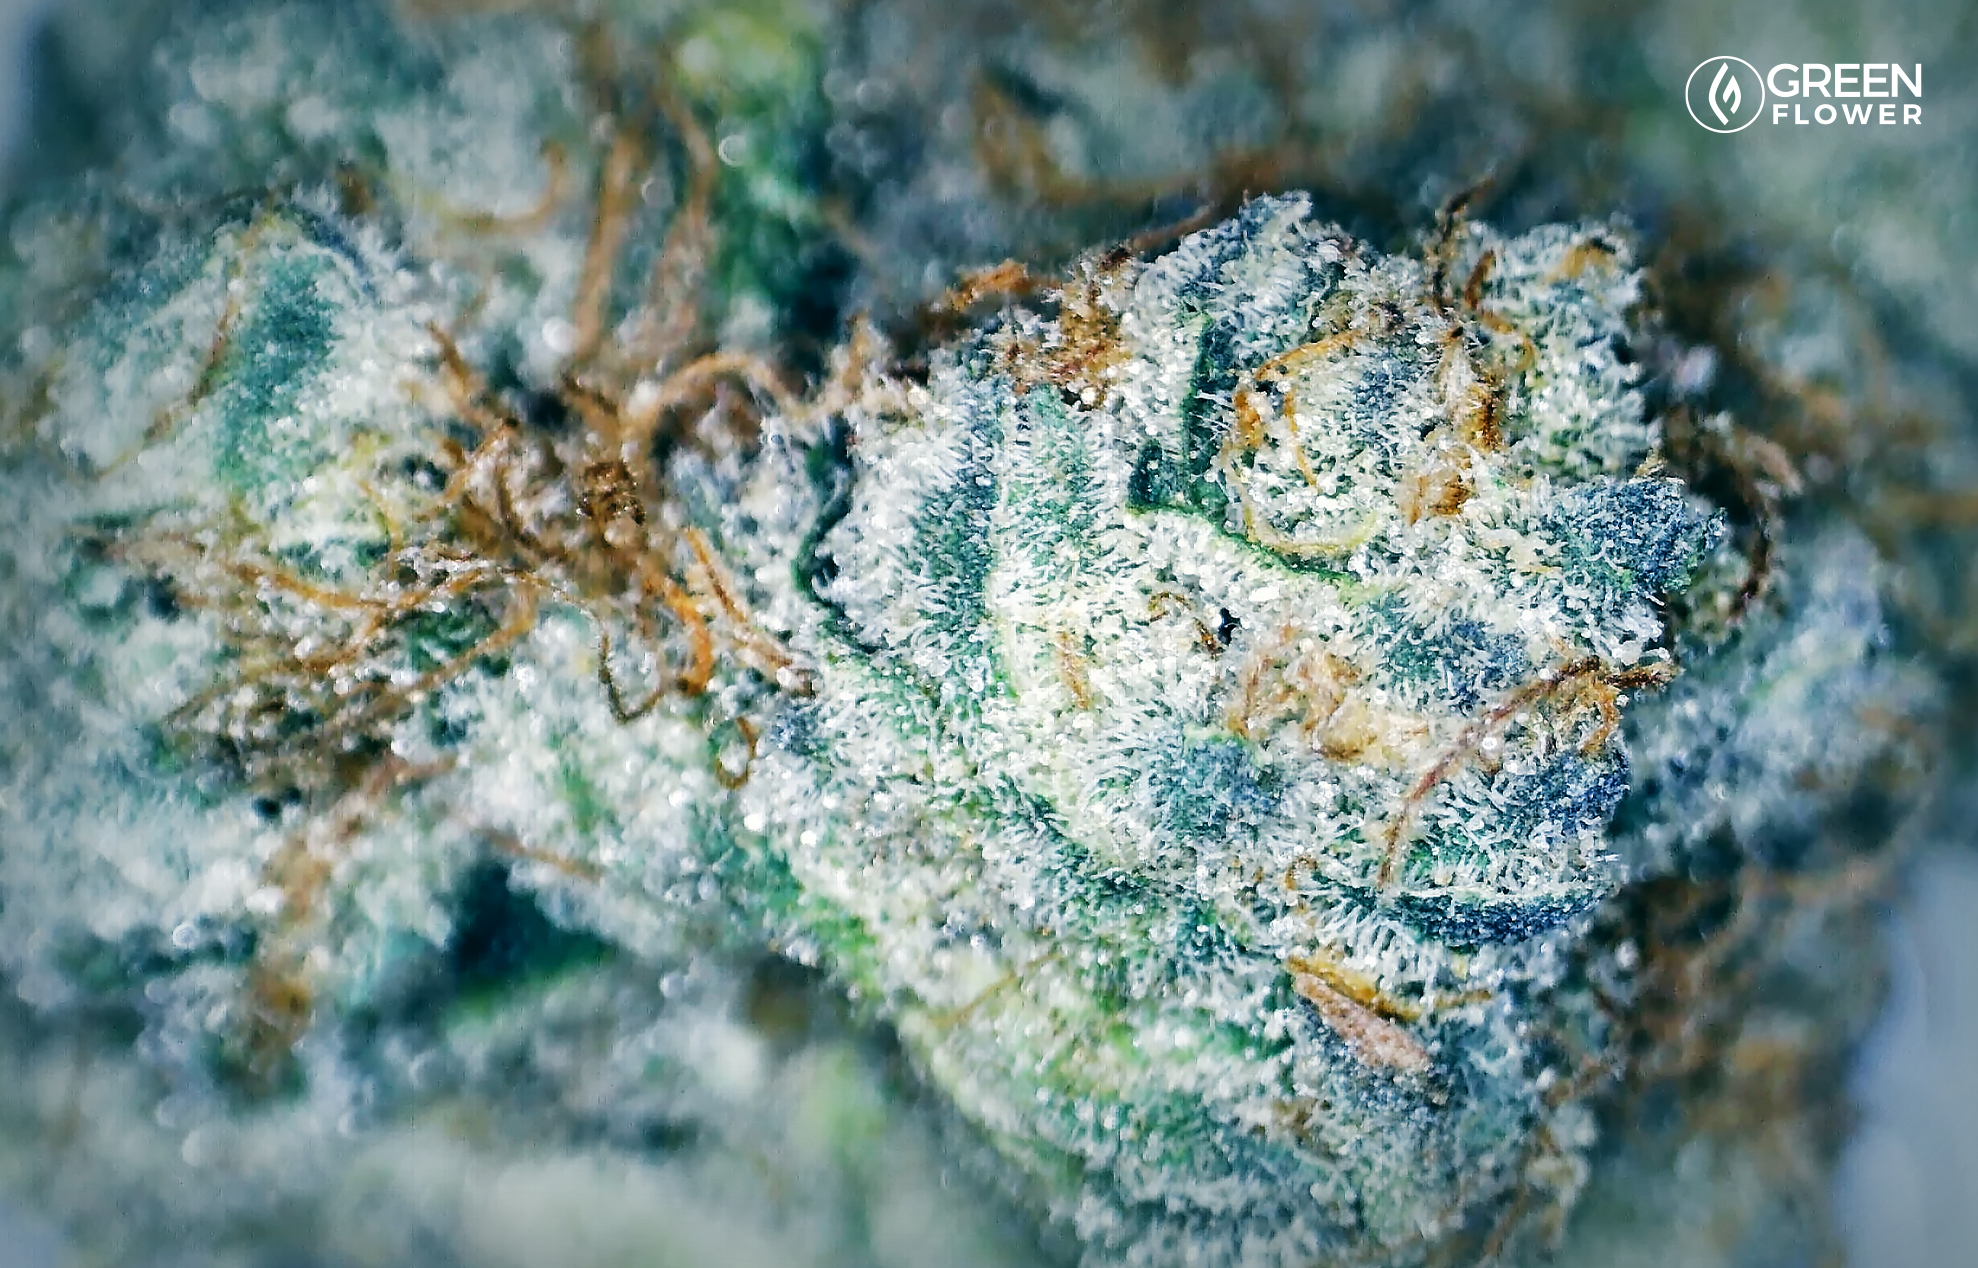 What Is The Wedding Cake Strain?